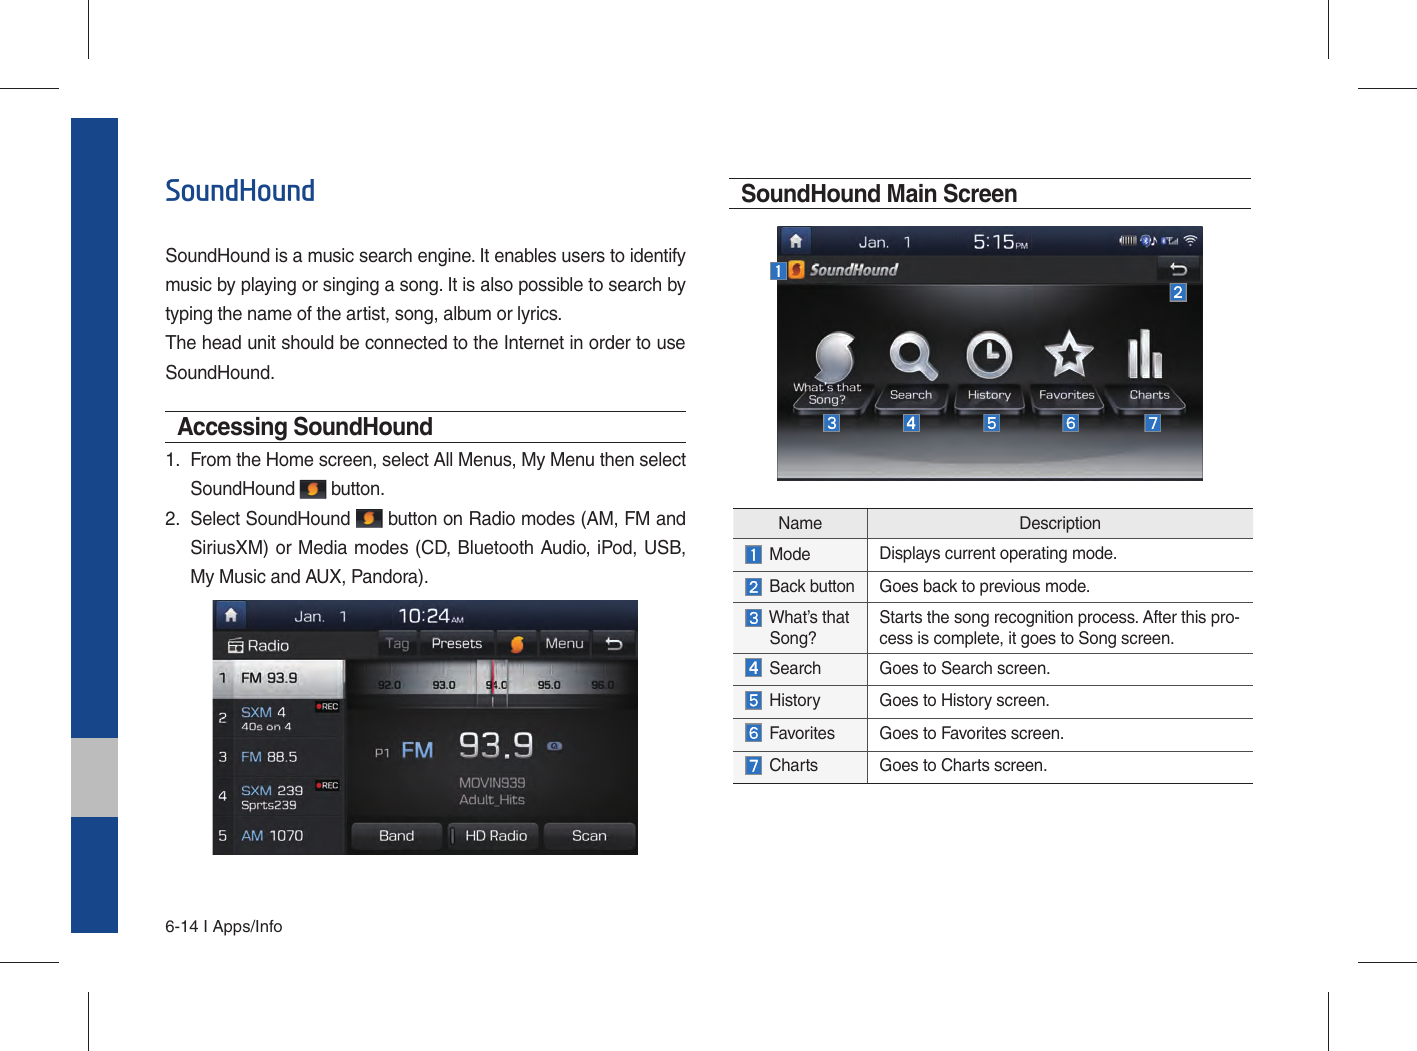 6-14 I Apps/InfoSoundHoundSoundHound is a music search engine. It enables users to identify music by playing or singing a song. It is also possible to search by typing the name of the artist, song, album or lyrics.The head unit should be connected to the Internet in order to use SoundHound.Accessing SoundHound 1.  From the Home screen, select All Menus, My Menu then selectSoundHound   button.2.  Select SoundHound   button on Radio modes (AM, FM andSiriusXM) or Media modes (CD, Bluetooth Audio, iPod, USB,My Music and AUX, Pandora). SoundHound Main ScreenName Description Mode Displays current operating mode.  Back button Goes back to previous mode.  What’s that  Song? Starts the song recognition process. After this pro-cess is complete, it goes to Song screen.  Search Goes to Search screen. History Goes to History screen.  Favorites Goes to Favorites screen. Charts Goes to Charts screen.